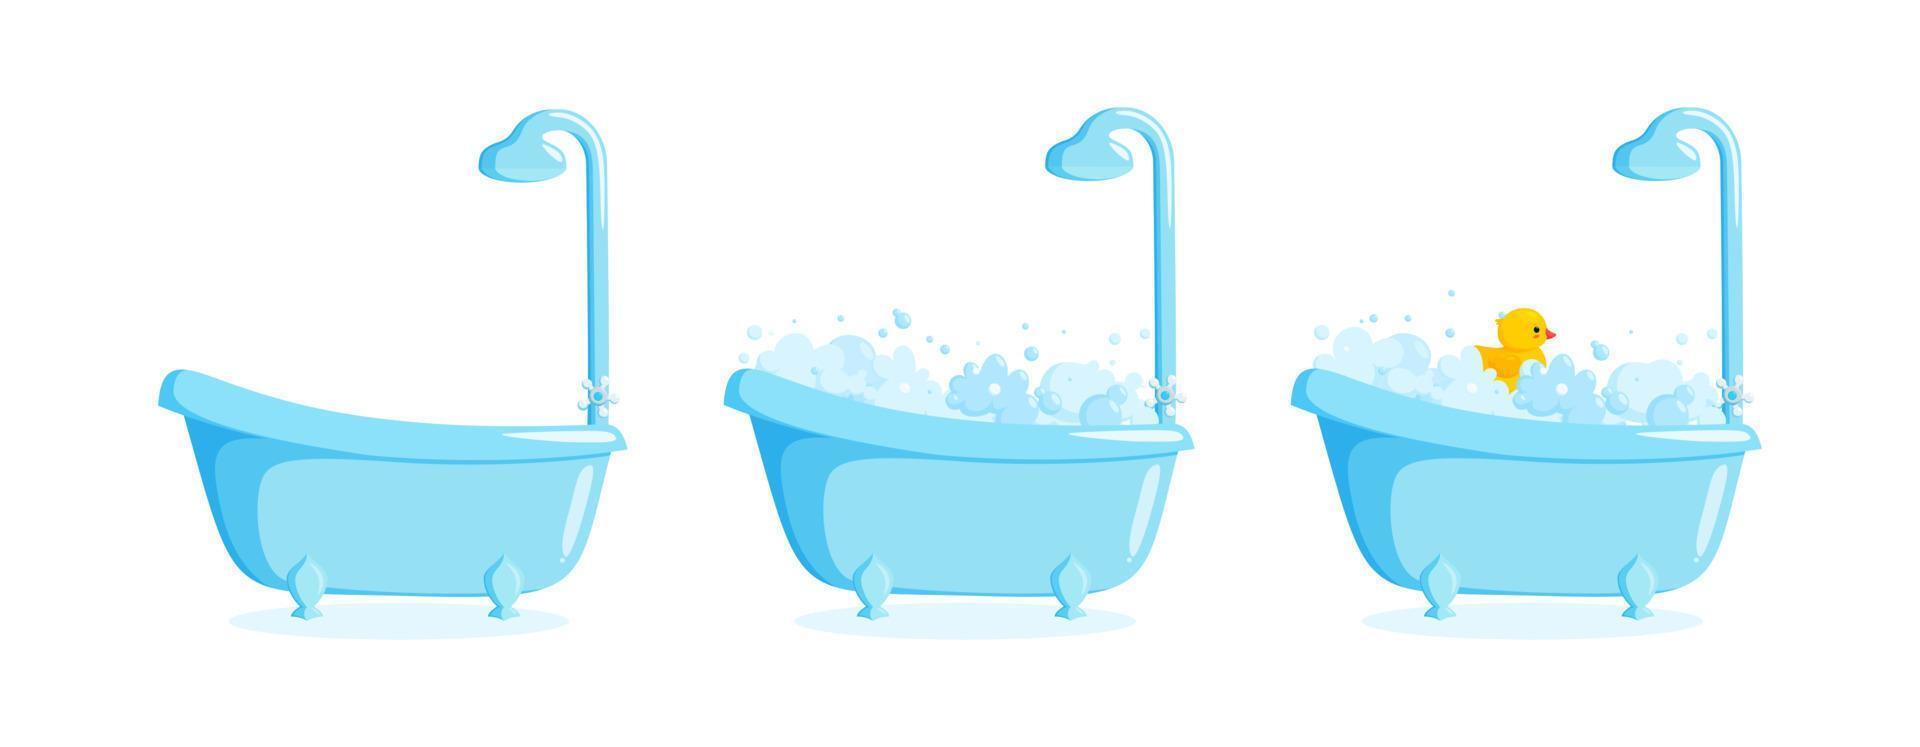 Bathtub with suds and rubber duck and shower. Clawfoot tub set with duck, bubbles and foam. Vector illustration